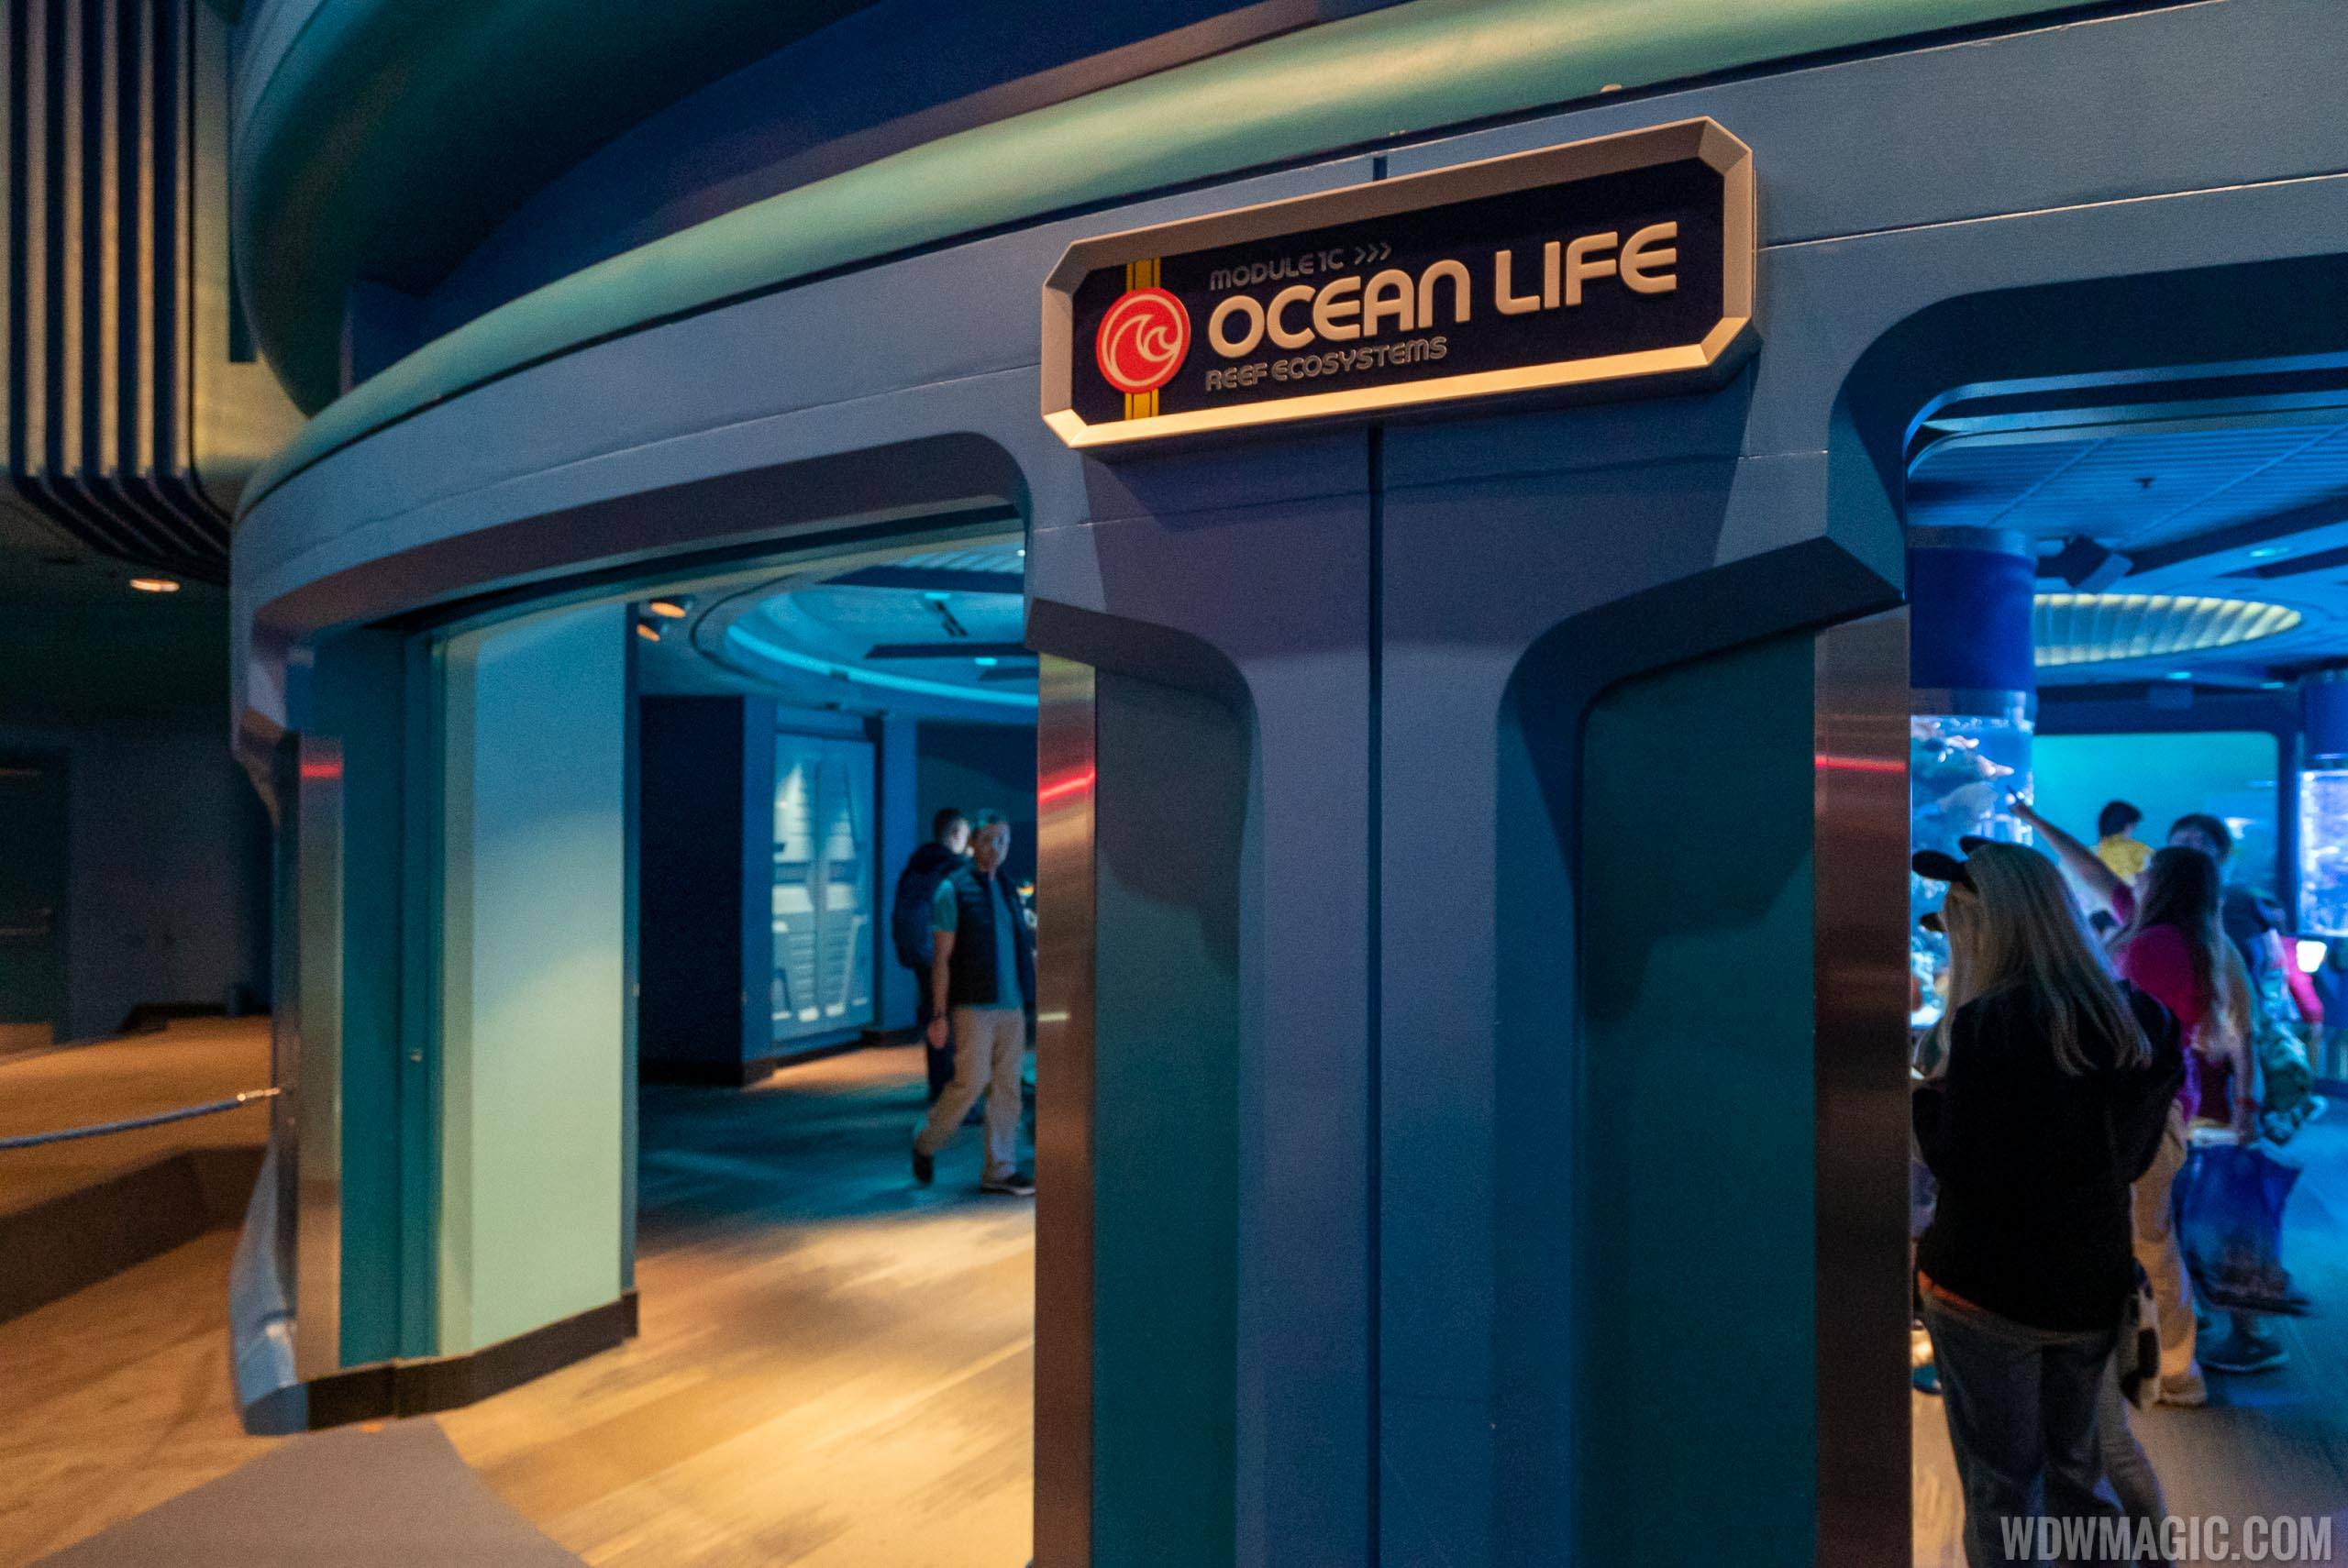 New signage inside the Seas with Nemo and Friends